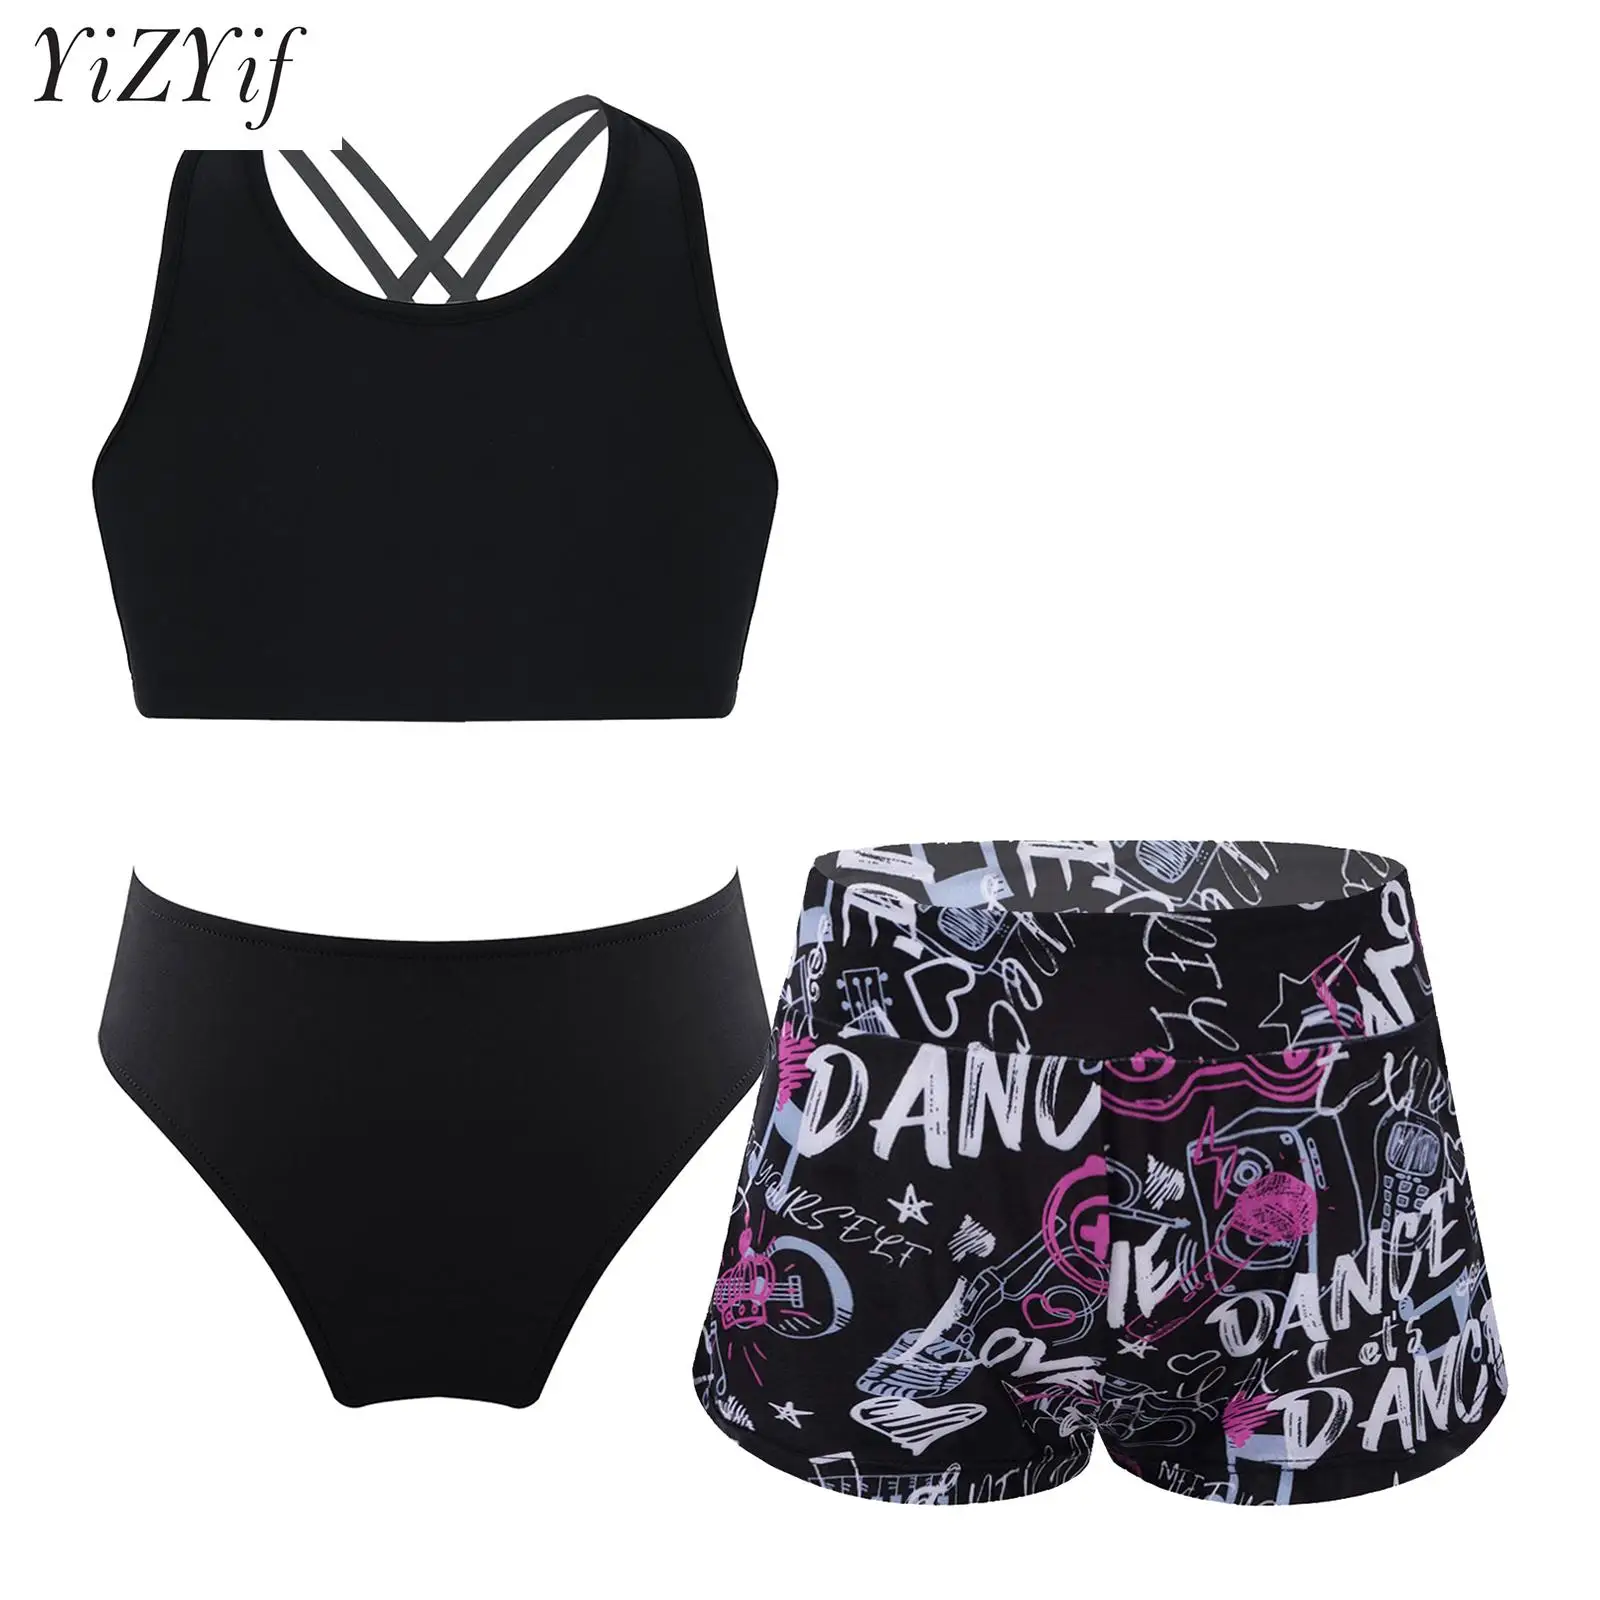 Kids Girls 3 Piece Tankini Swimwear Set Round Neck Crop Tank Top with Elastic Waistband Shorts and Briefs Sport Swimsuit Outfit